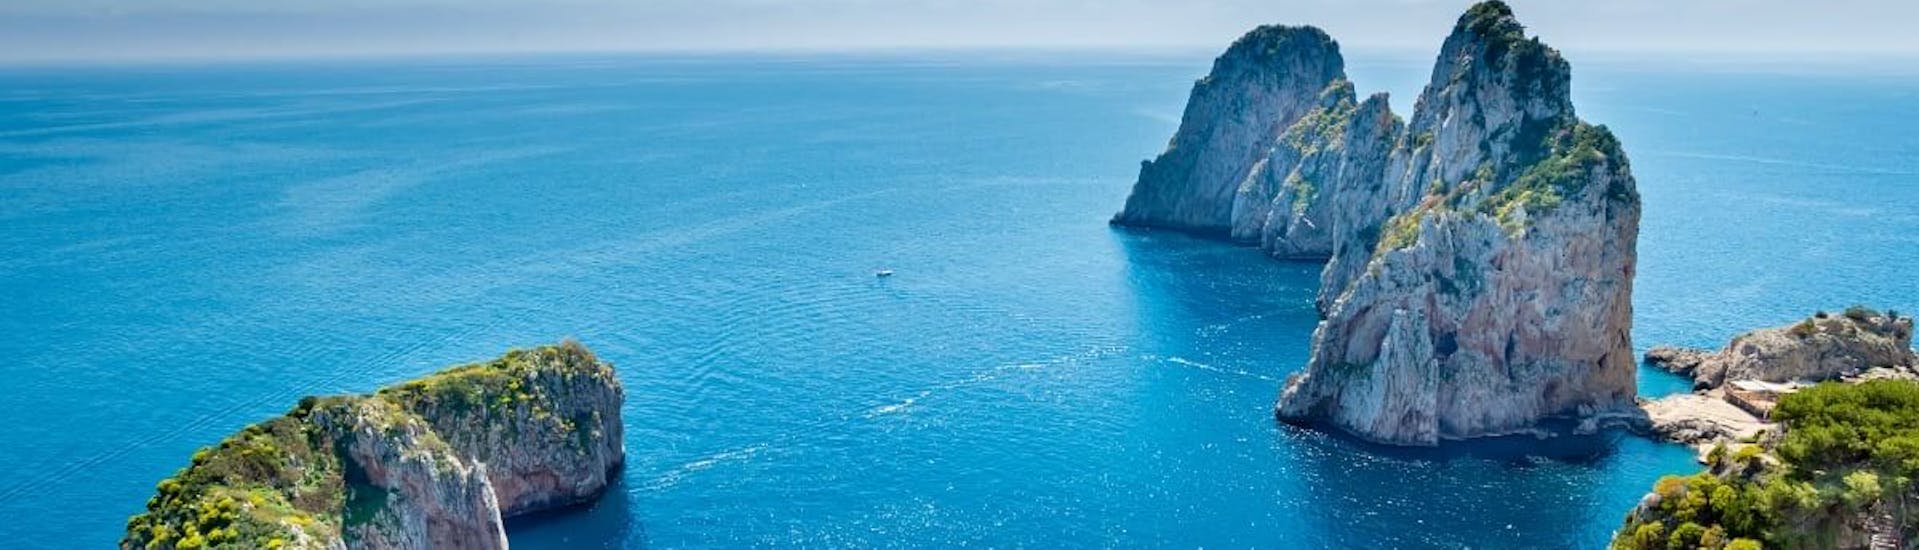 The cristal clear waters of Sorrento where you will have the Boat Trip from Pozzuoli to Capri and Sorrento with Lunch.